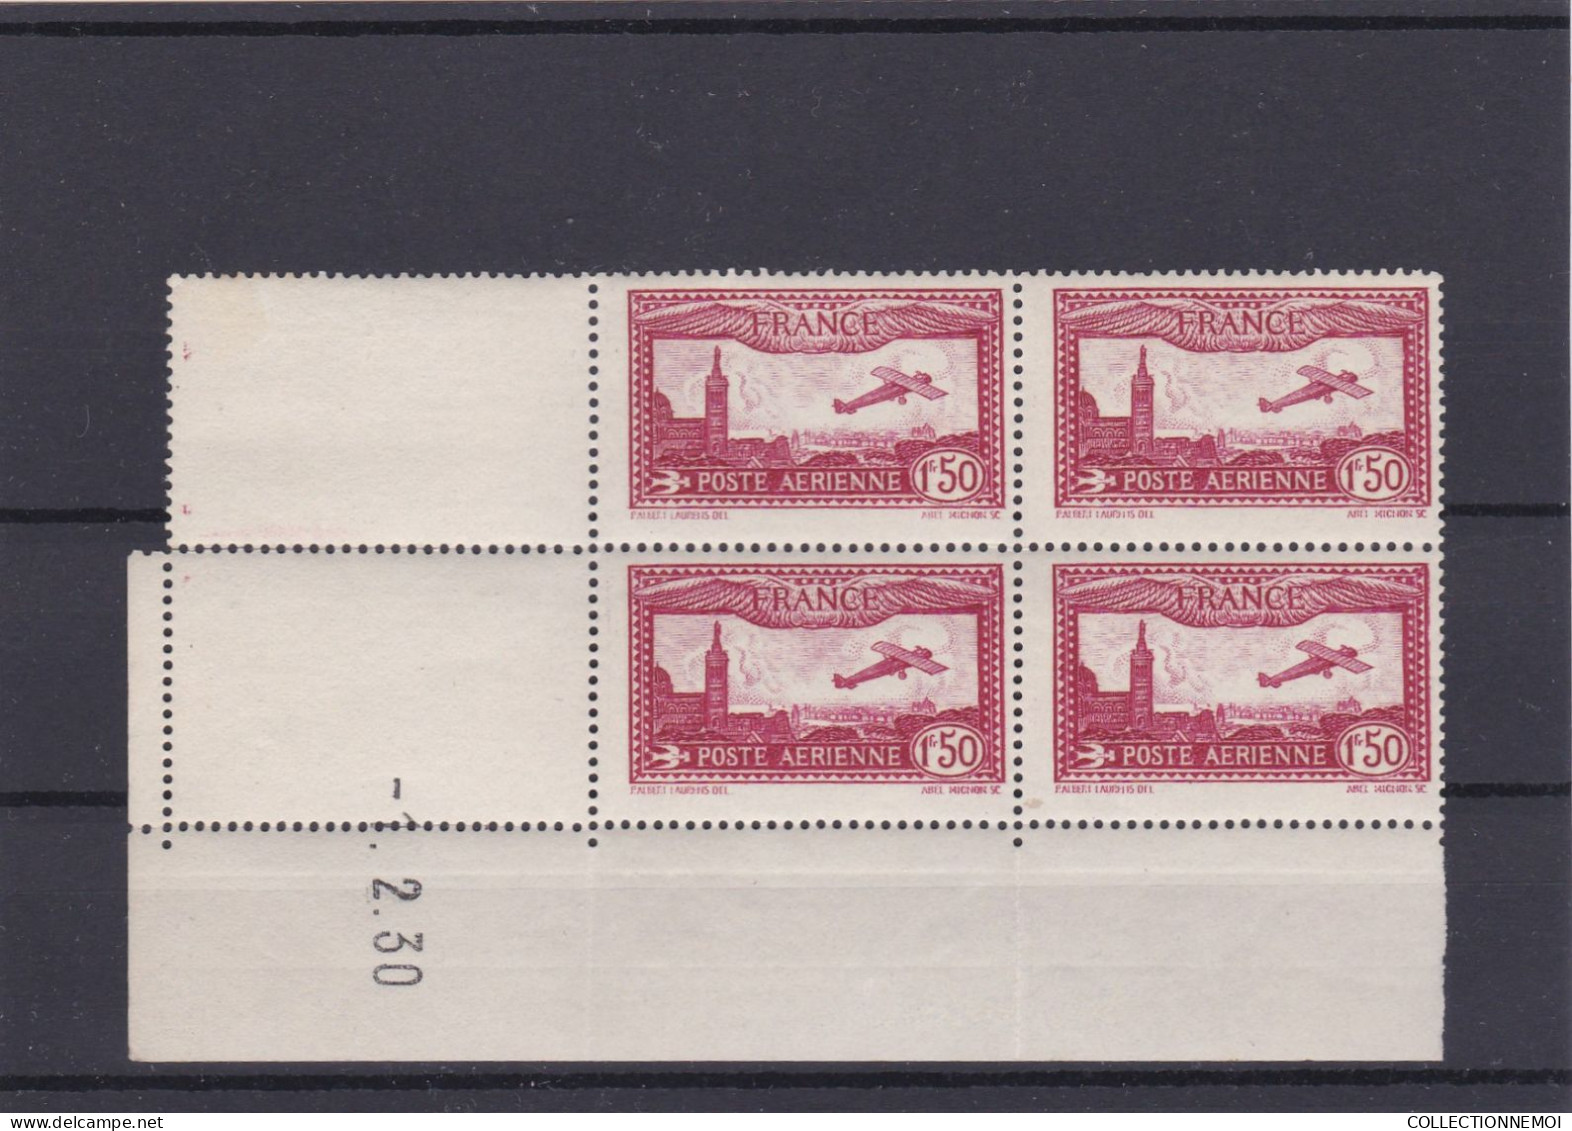 FRANCE ,, ,,,POSTE AERIENNE N° 5 Luxe ,,4 Exemplaires - 1927-1959 Postfris